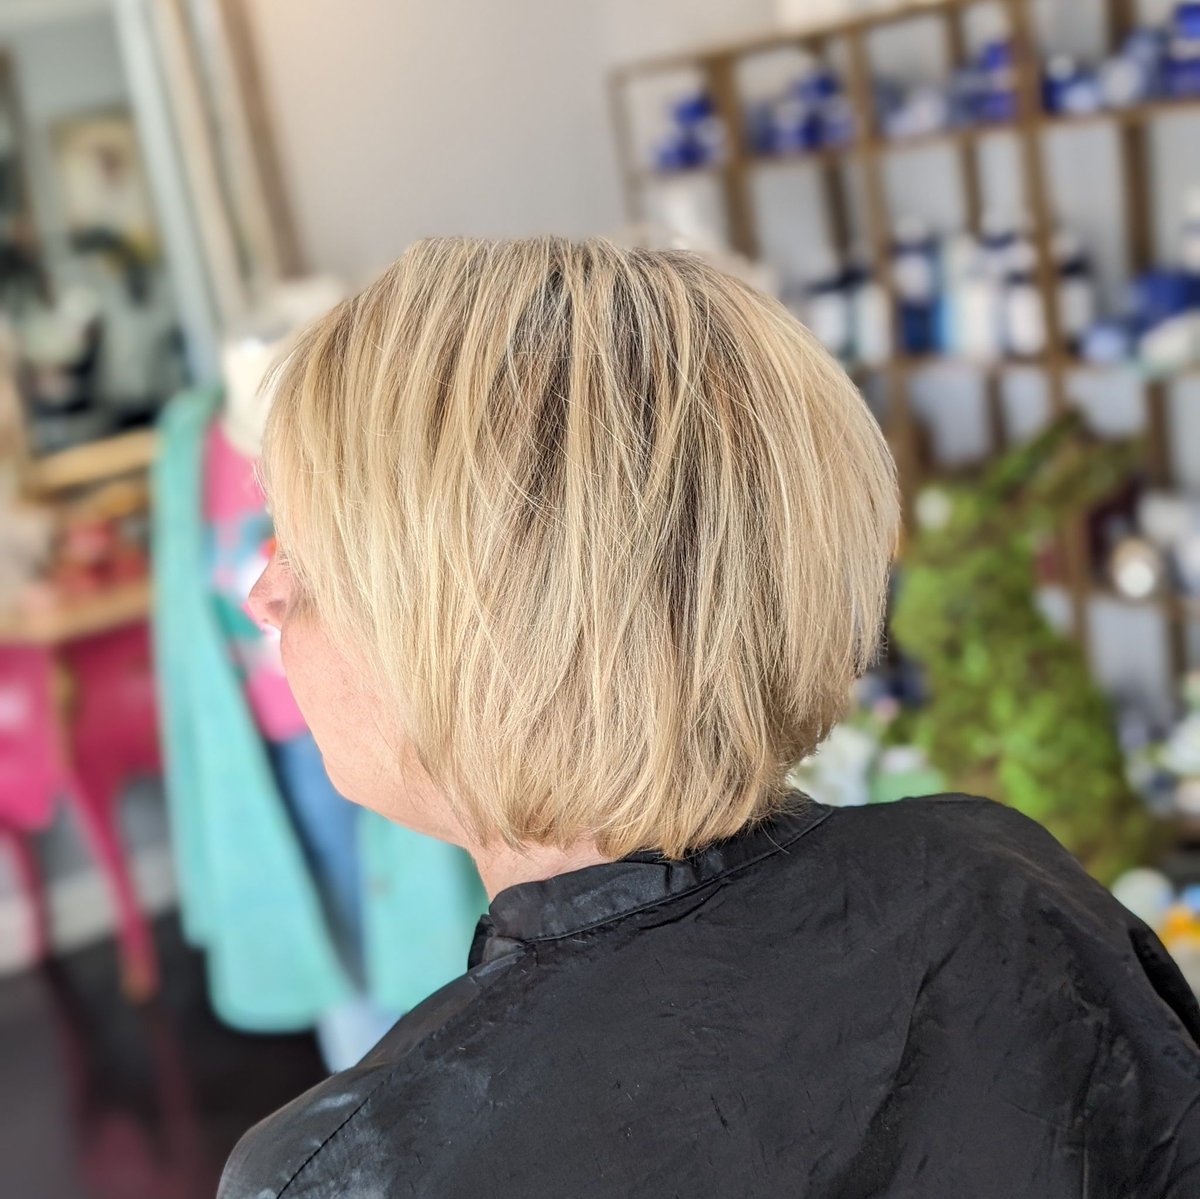 Susan told Christy she was looking for a haircut that would make her hair look full and thick.

#conroehairsalon #thewoodlandshairsalon #luxuryhairsalon #salonthewoodlands #houstonsalon #houstonhairstylist #olaplex #houston #blowdrybarthewoodlands #hairextensions